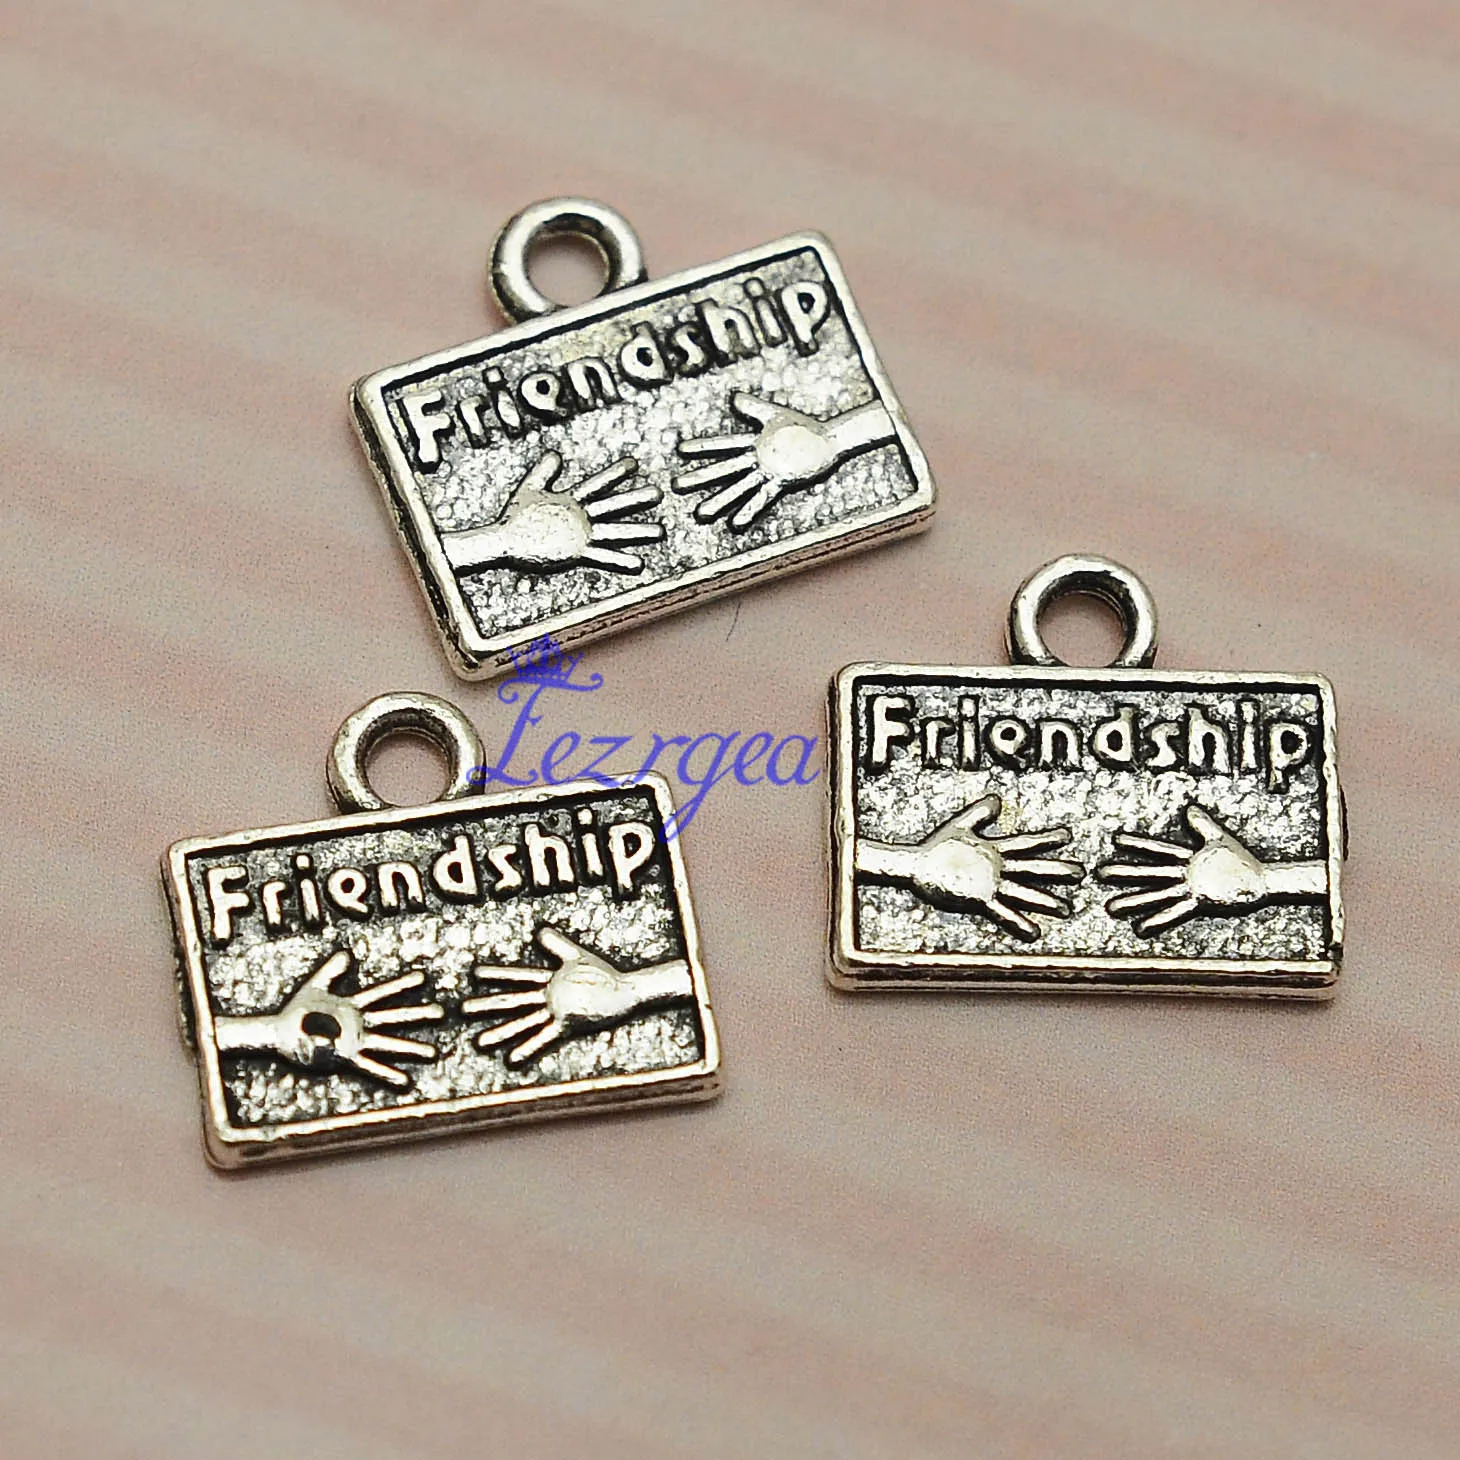 

30pcs/lot--15x13mm Antique Silver Plated Friendship with Hands Charms Best Friend BFF Pendants DIY Supplies Jewelry Accessories